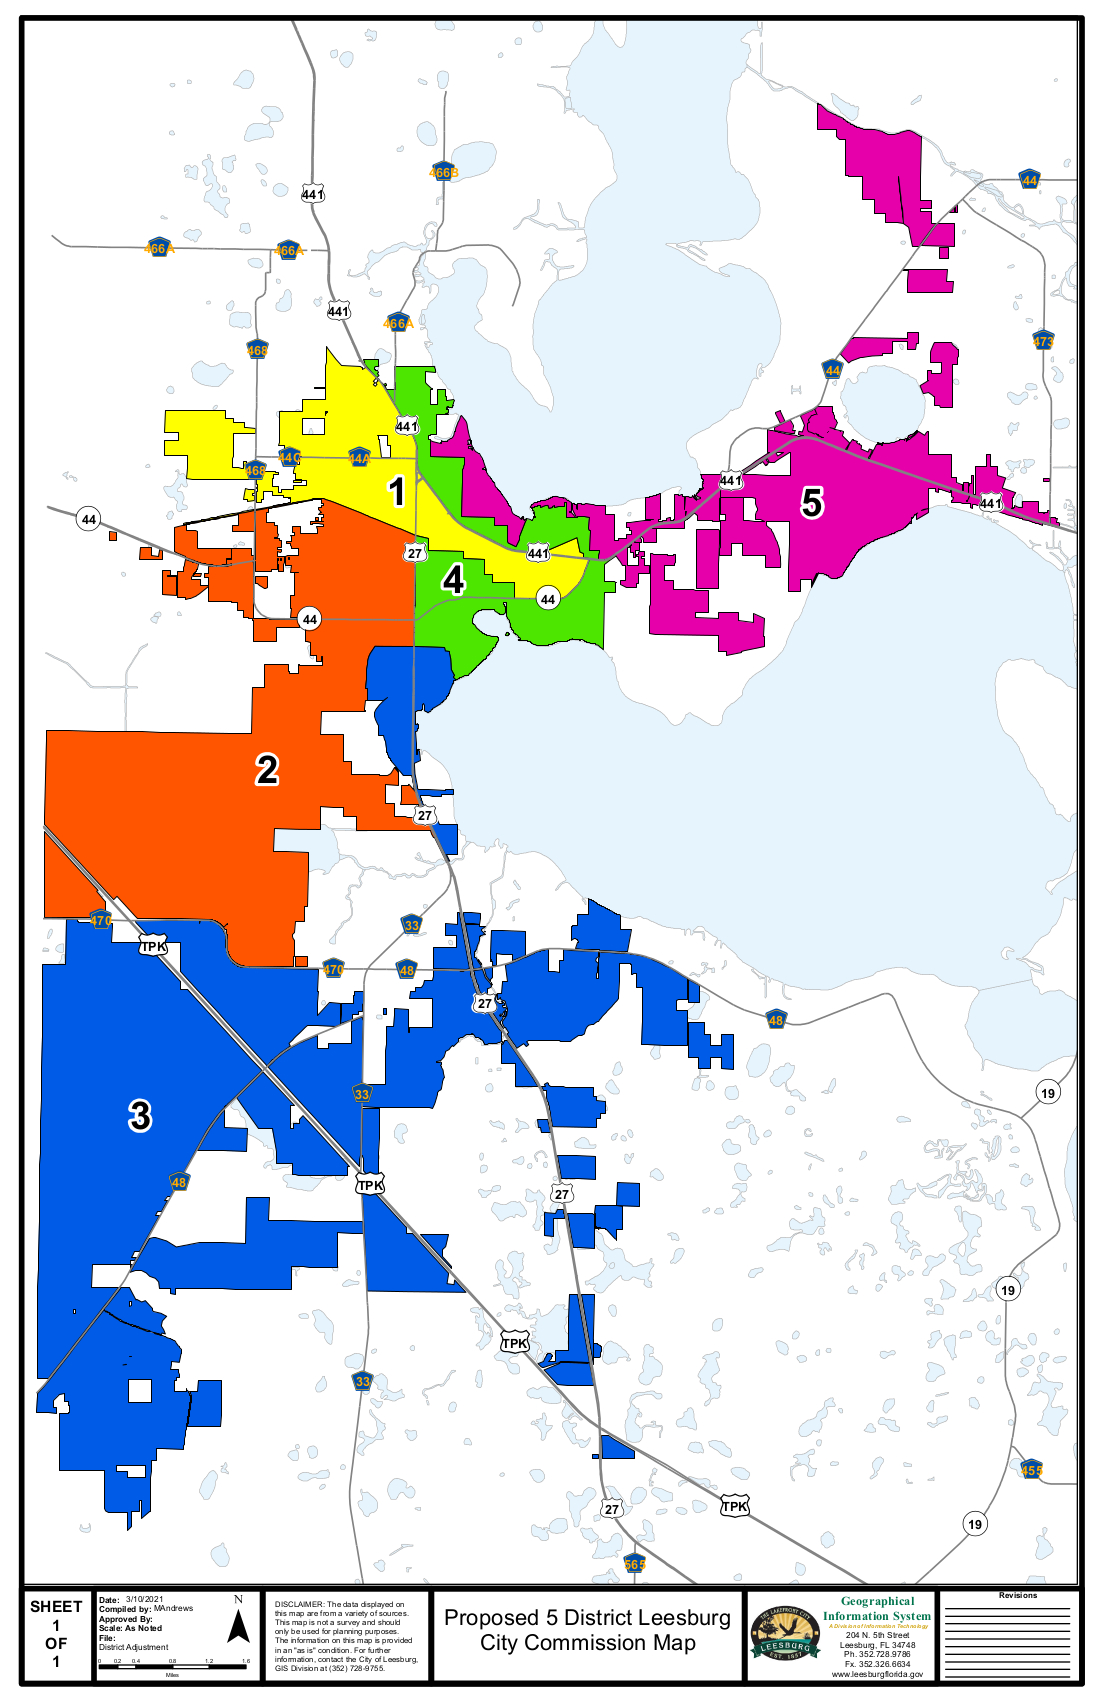 Proposed City Commission 5 Single-Member District Map showing major highways